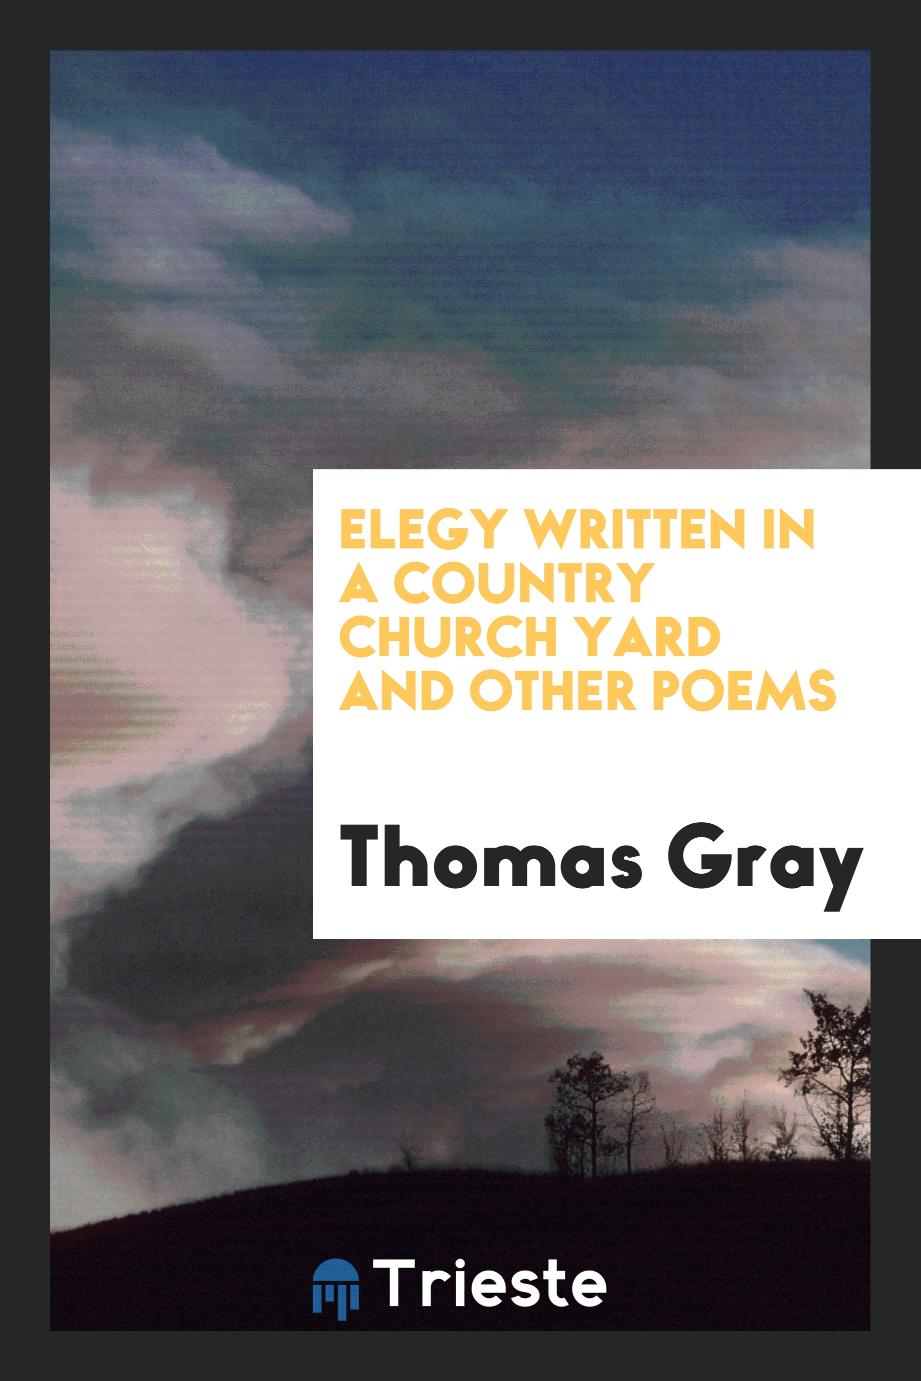 Thomas Gray - Elegy Written in a Country Church Yard and Other Poems